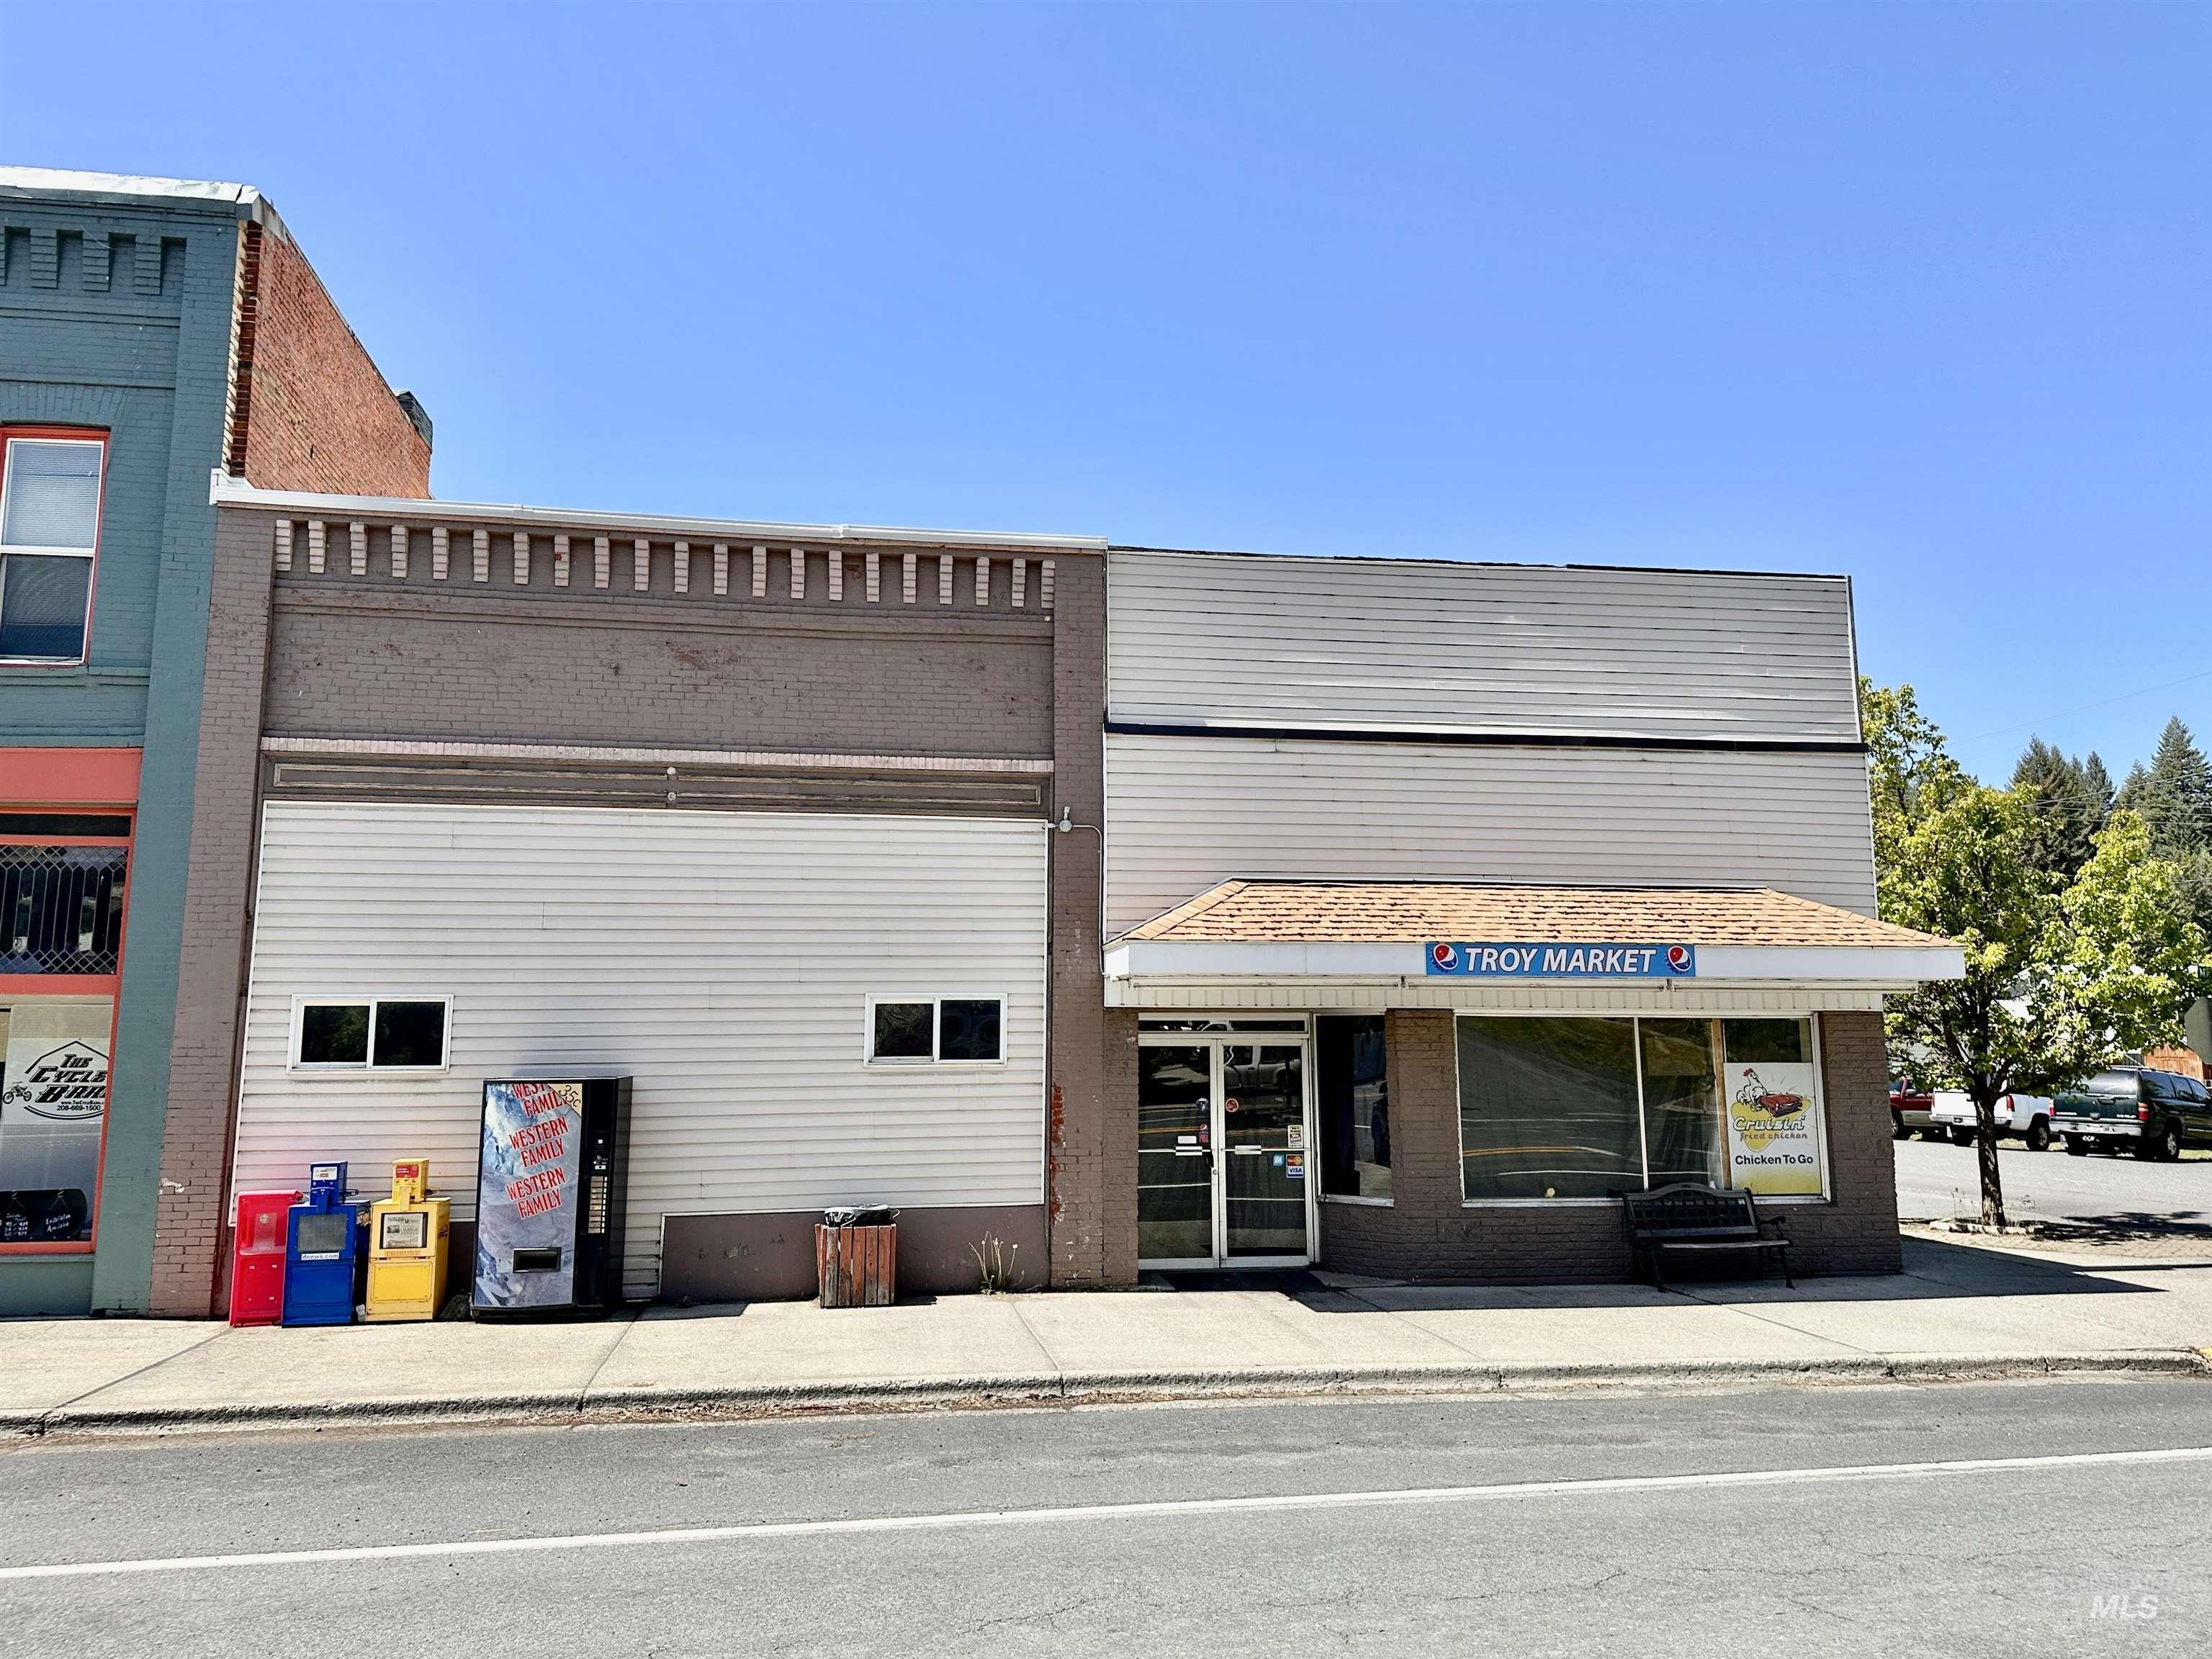 339/401 S Main St, Troy, Idaho 83871, Business/Commercial For Sale, Price $225,000,MLS 98902464